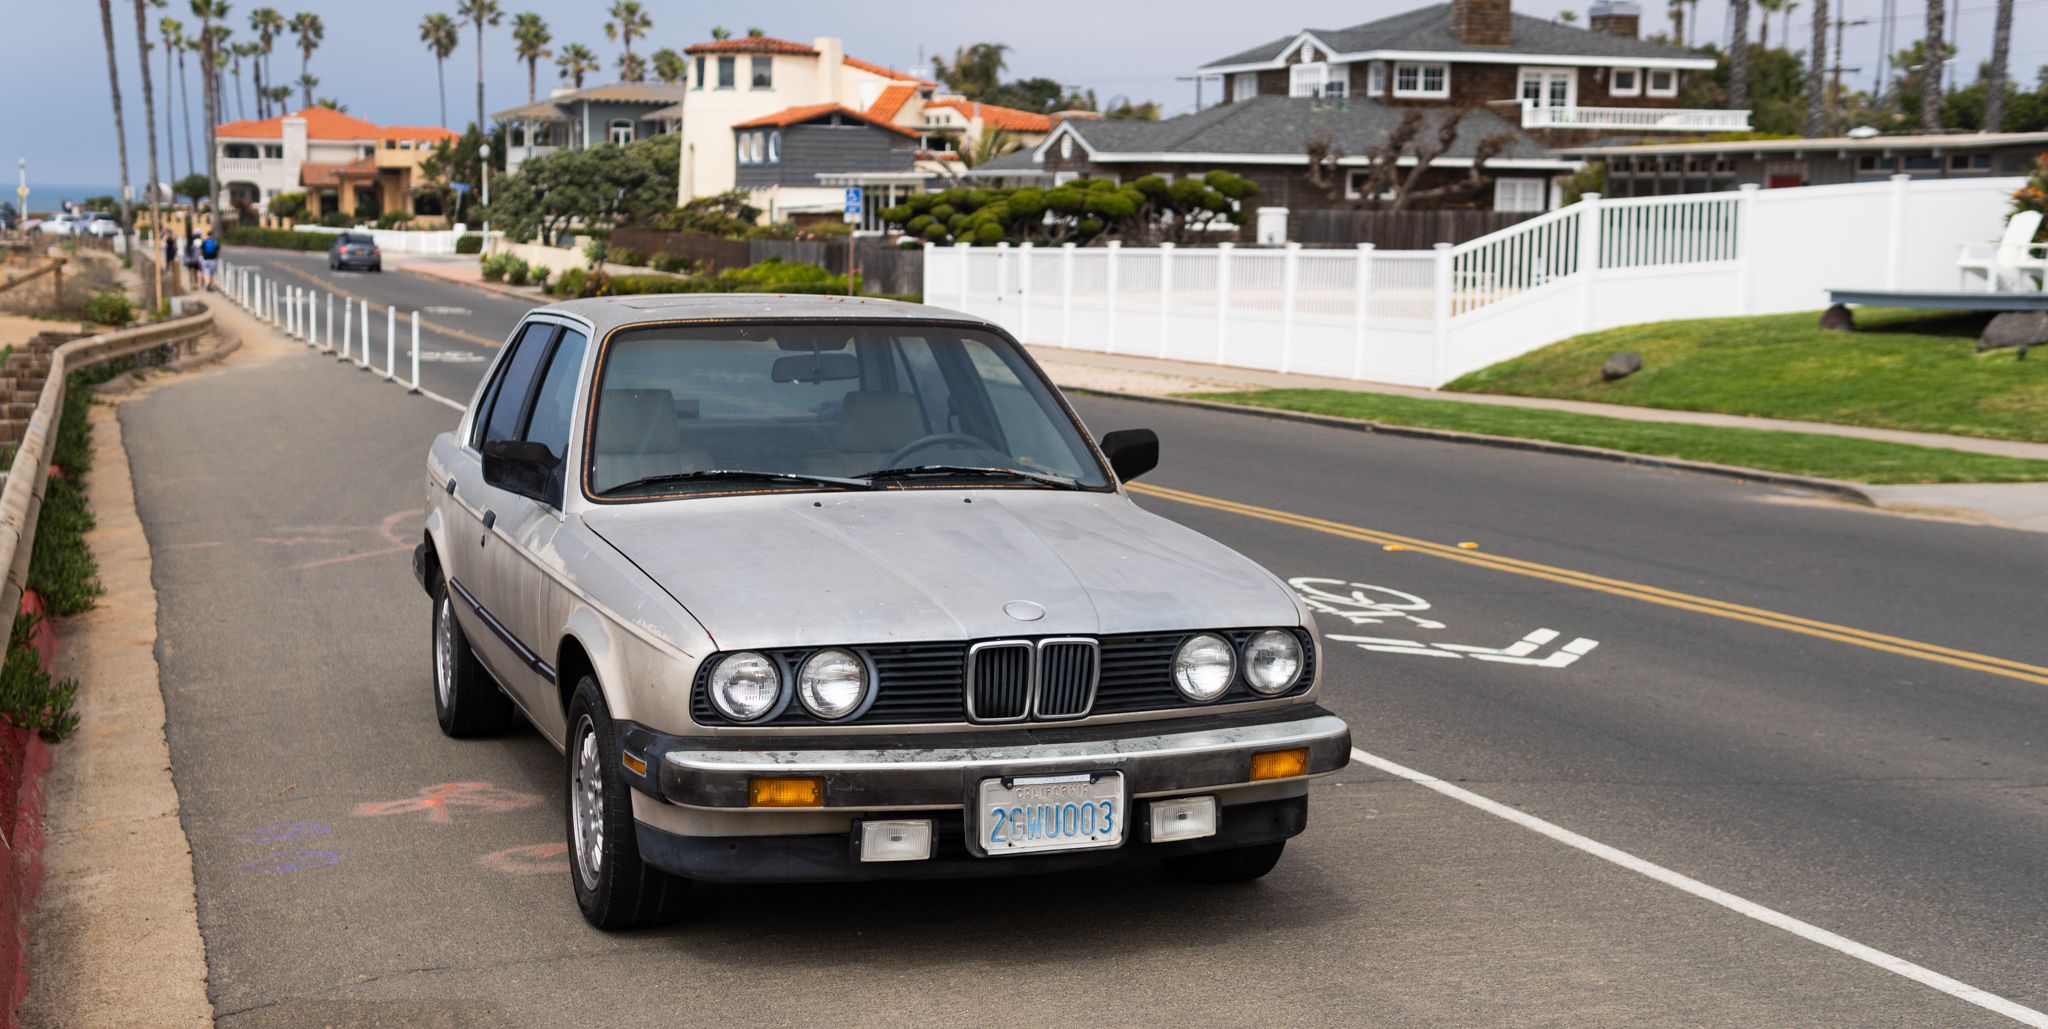 I Bought a Barely Working E30 Because I'm Sick of Caring About Cars